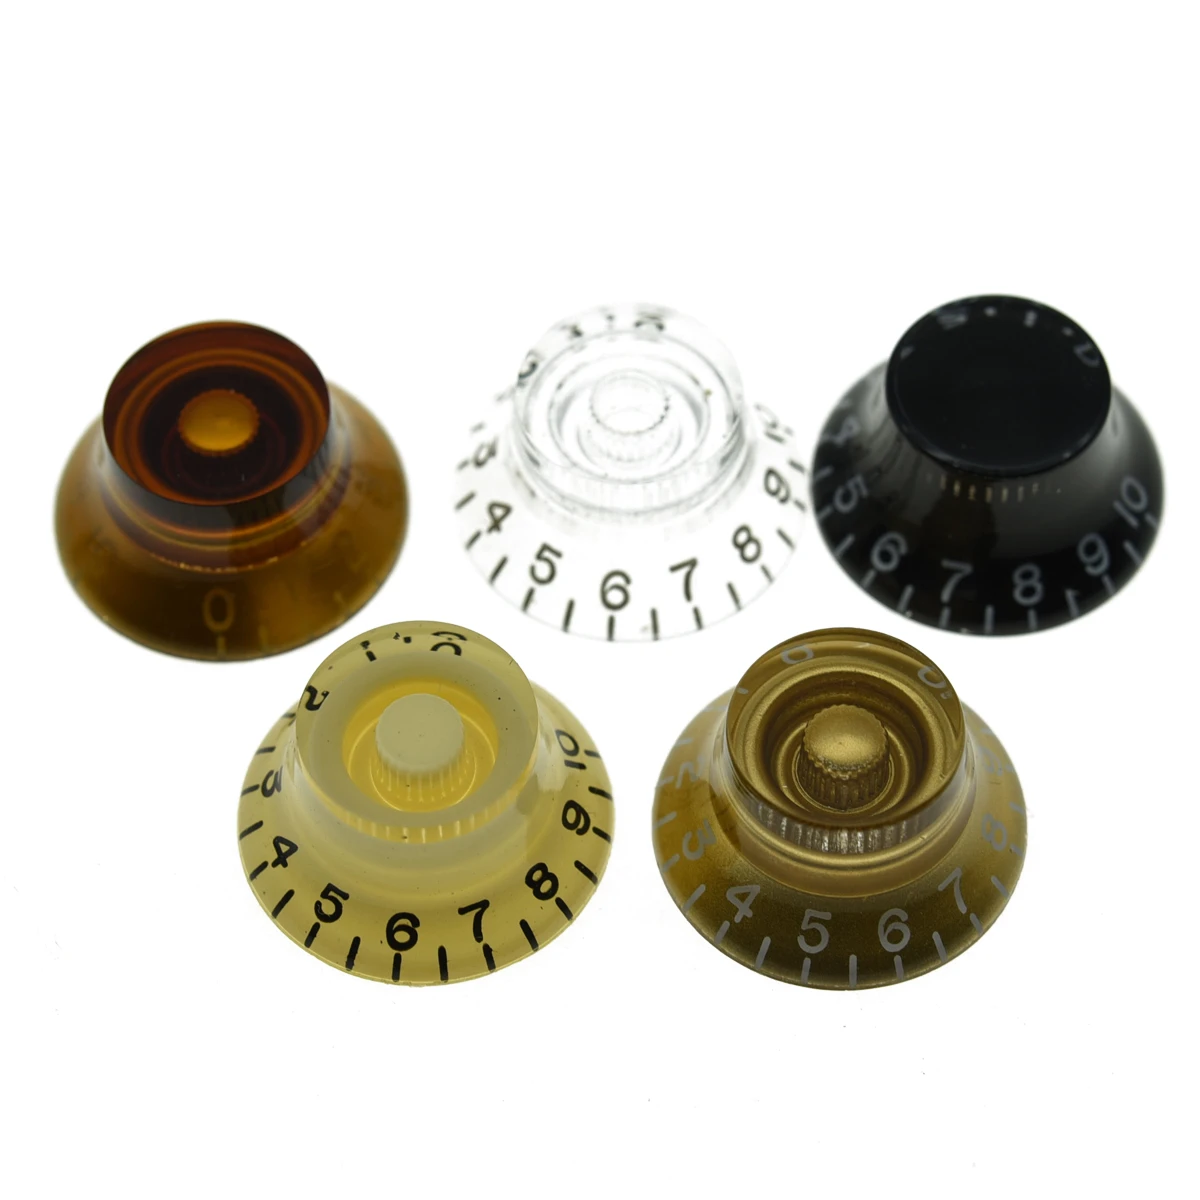 At tilpasse sig robot international KAISH USA/Imperial Spec LP Guitar Bell Knobs 24 Fine Spline Top Hat Knobs  for Gibson Les Pauls or CTS Pots|Guitar Parts & Accessories| - AliExpress